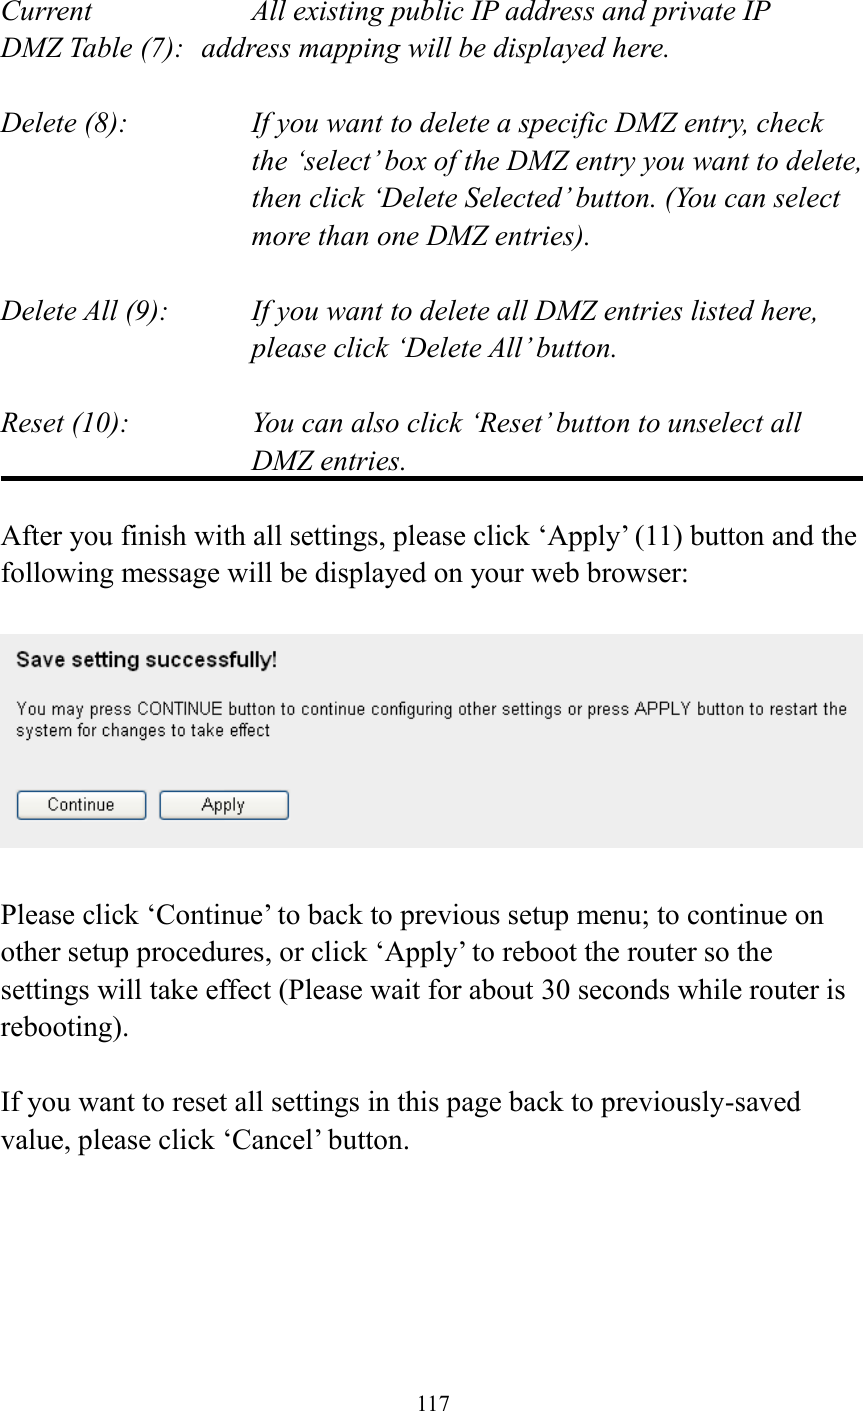 117   Current        All existing public IP address and private IP DMZ Table (7):   address mapping will be displayed here.  Delete (8):      If you want to delete a specific DMZ entry, check     the ‘select’ box of the DMZ entry you want to delete, then click ‘Delete Selected’ button. (You can select more than one DMZ entries).  Delete All (9):    If you want to delete all DMZ entries listed here, please click ‘Delete All’ button.  Reset (10):    You can also click ‘Reset’ button to unselect all DMZ entries.  After you finish with all settings, please click ‘Apply’ (11) button and the following message will be displayed on your web browser:    Please click ‘Continue’ to back to previous setup menu; to continue on other setup procedures, or click ‘Apply’ to reboot the router so the settings will take effect (Please wait for about 30 seconds while router is rebooting).  If you want to reset all settings in this page back to previously-saved value, please click ‘Cancel’ button.      